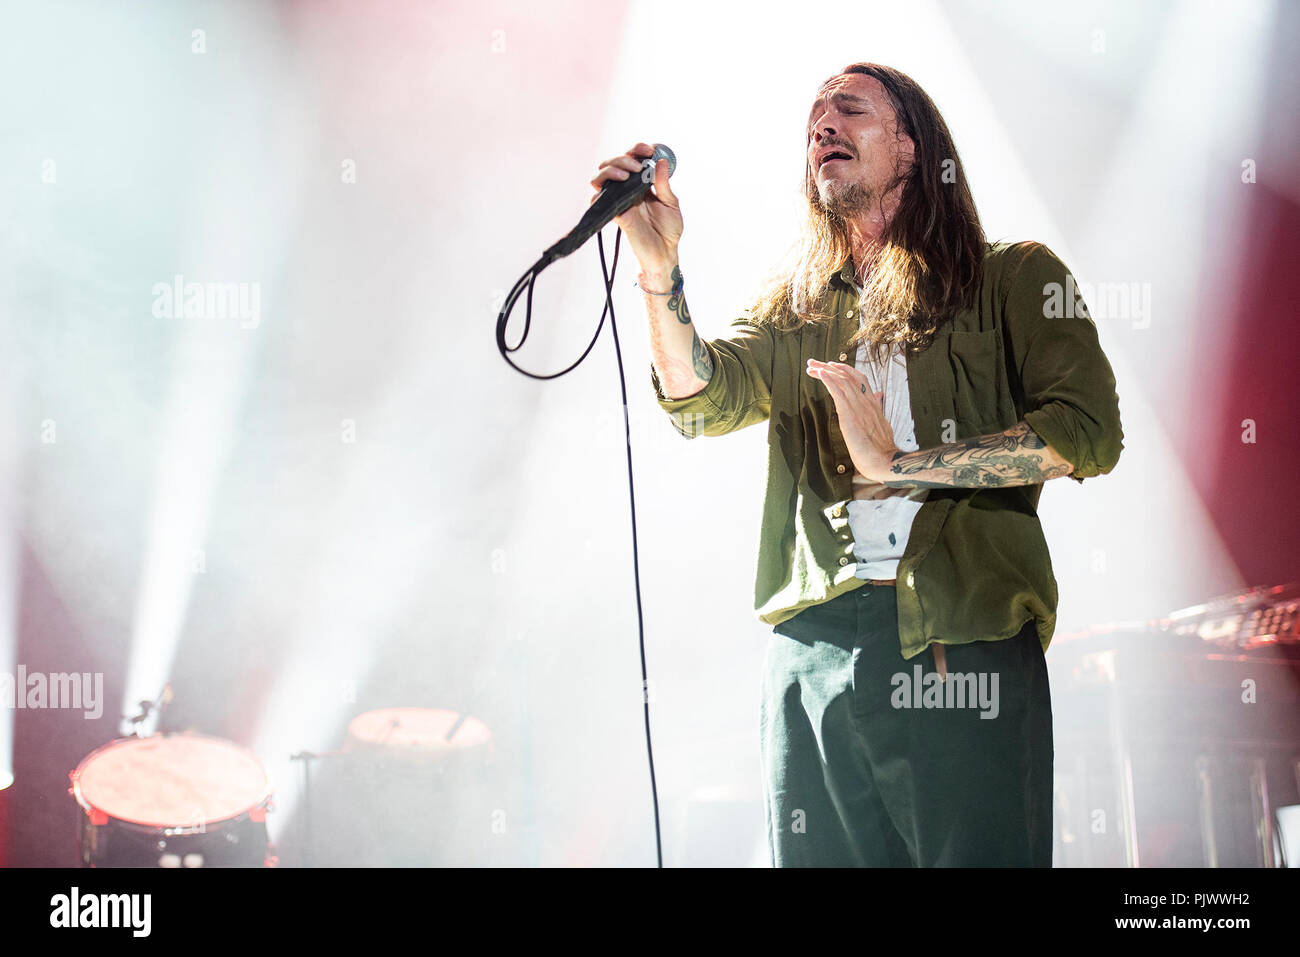 Manchester, UK. 8th September 2018.Brandon Boyd, Mike Einziger, Jose Pasillas, Chris Kilmore and Ben Kenney of Incubus perform at the O2 Apollo in Manchester 08/09/2018 Credit: Gary Mather/Alamy Live News Stock Photo